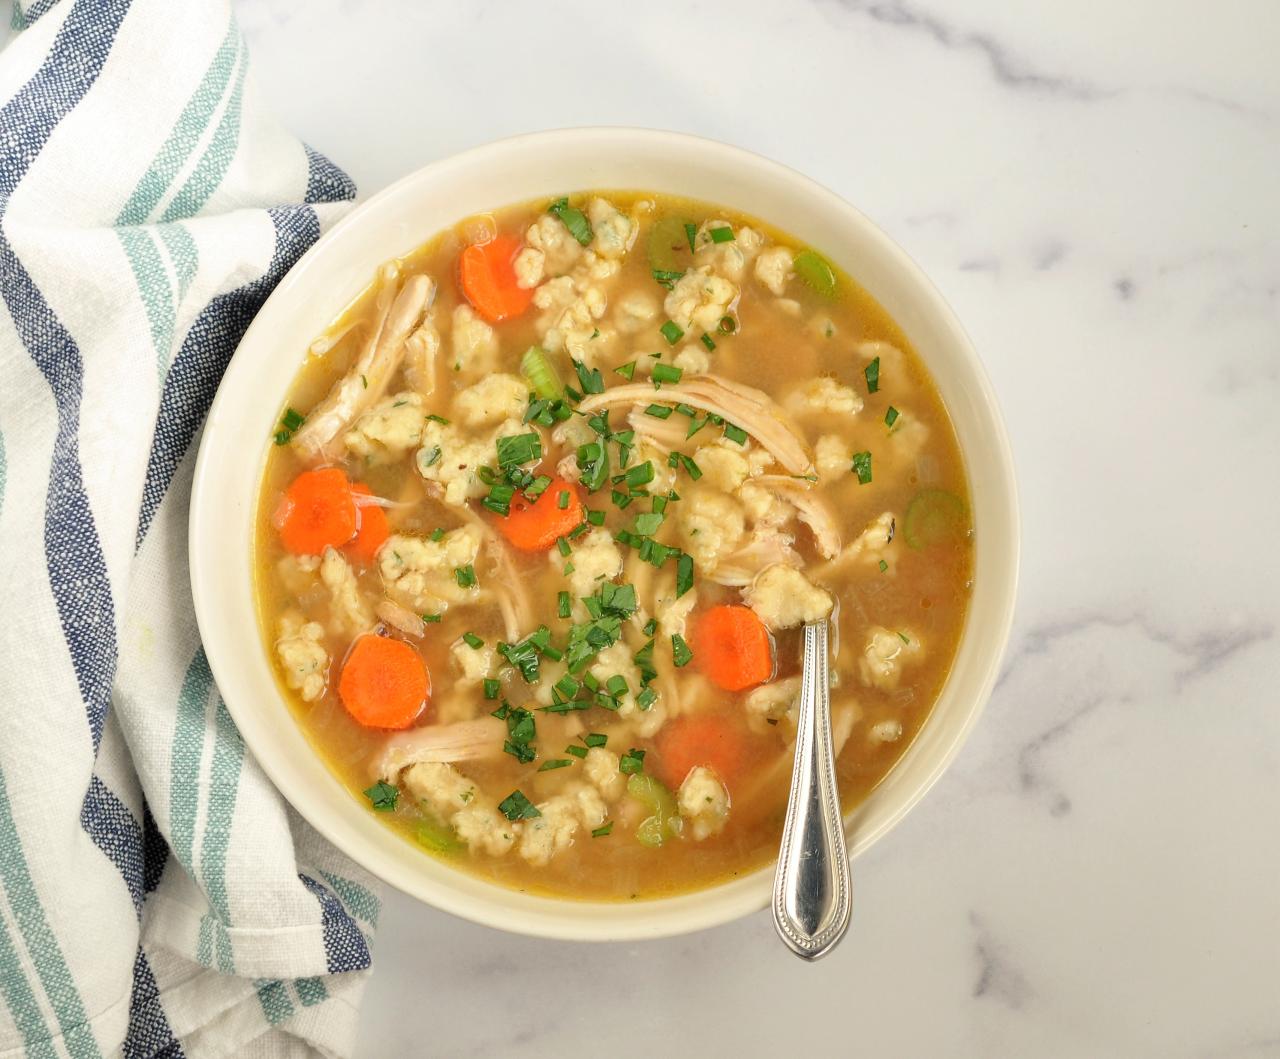 Soup weather is here: Start with this delicious twist on chicken soup